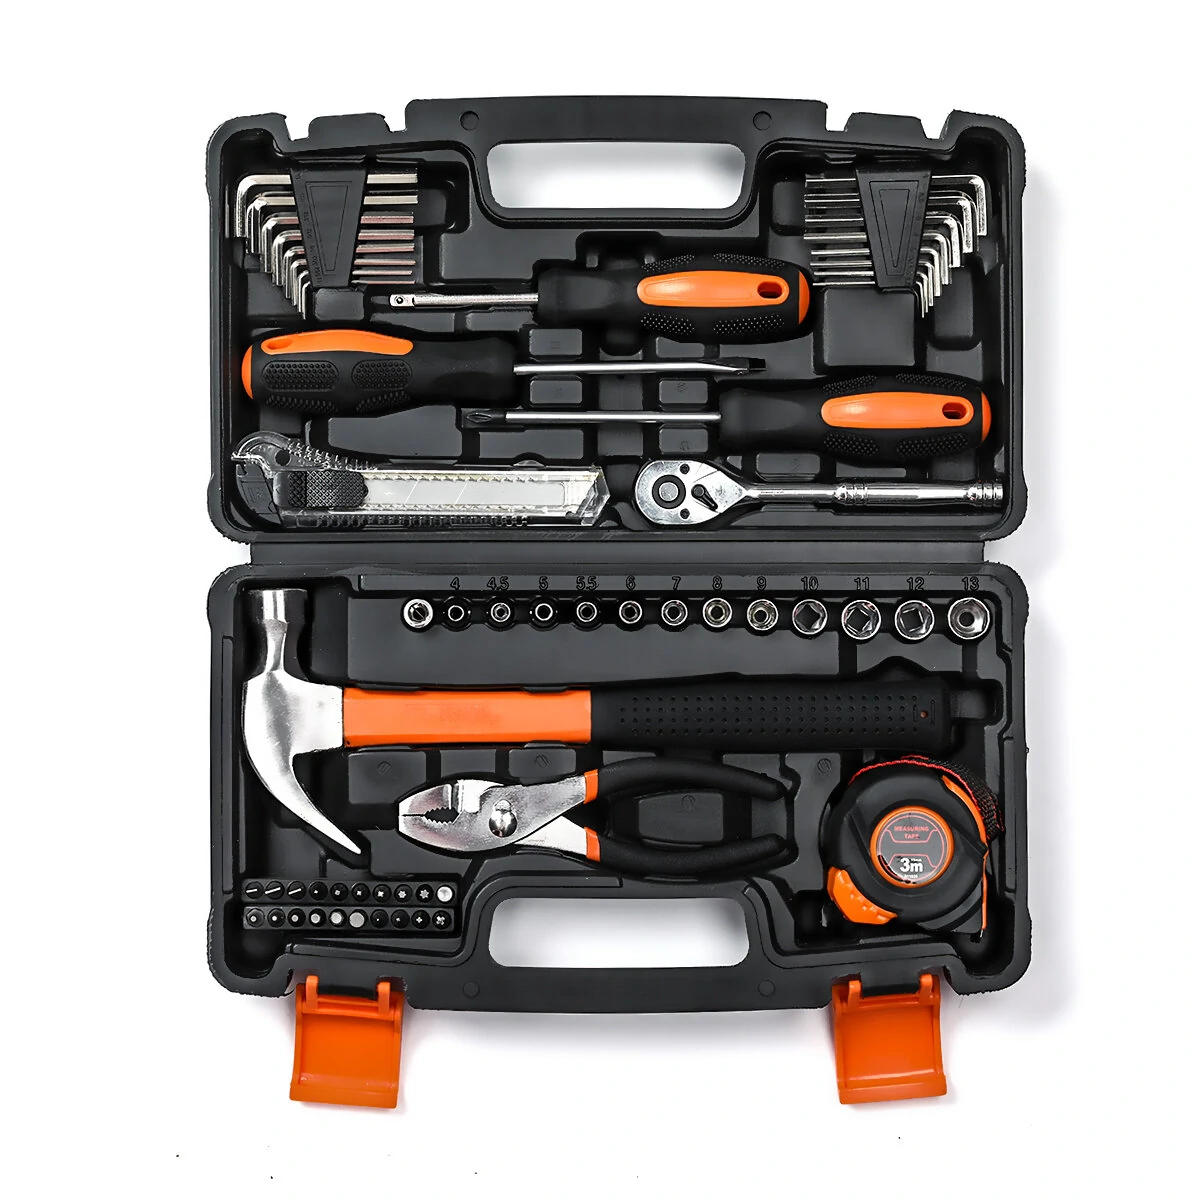 TOPSHAK TS-CH3 57 Piece Socket Wrench Auto Repair Tool Mixed Tool Set Hand Tool Kit with Plastic Toolbox Storage Case - EU Standard